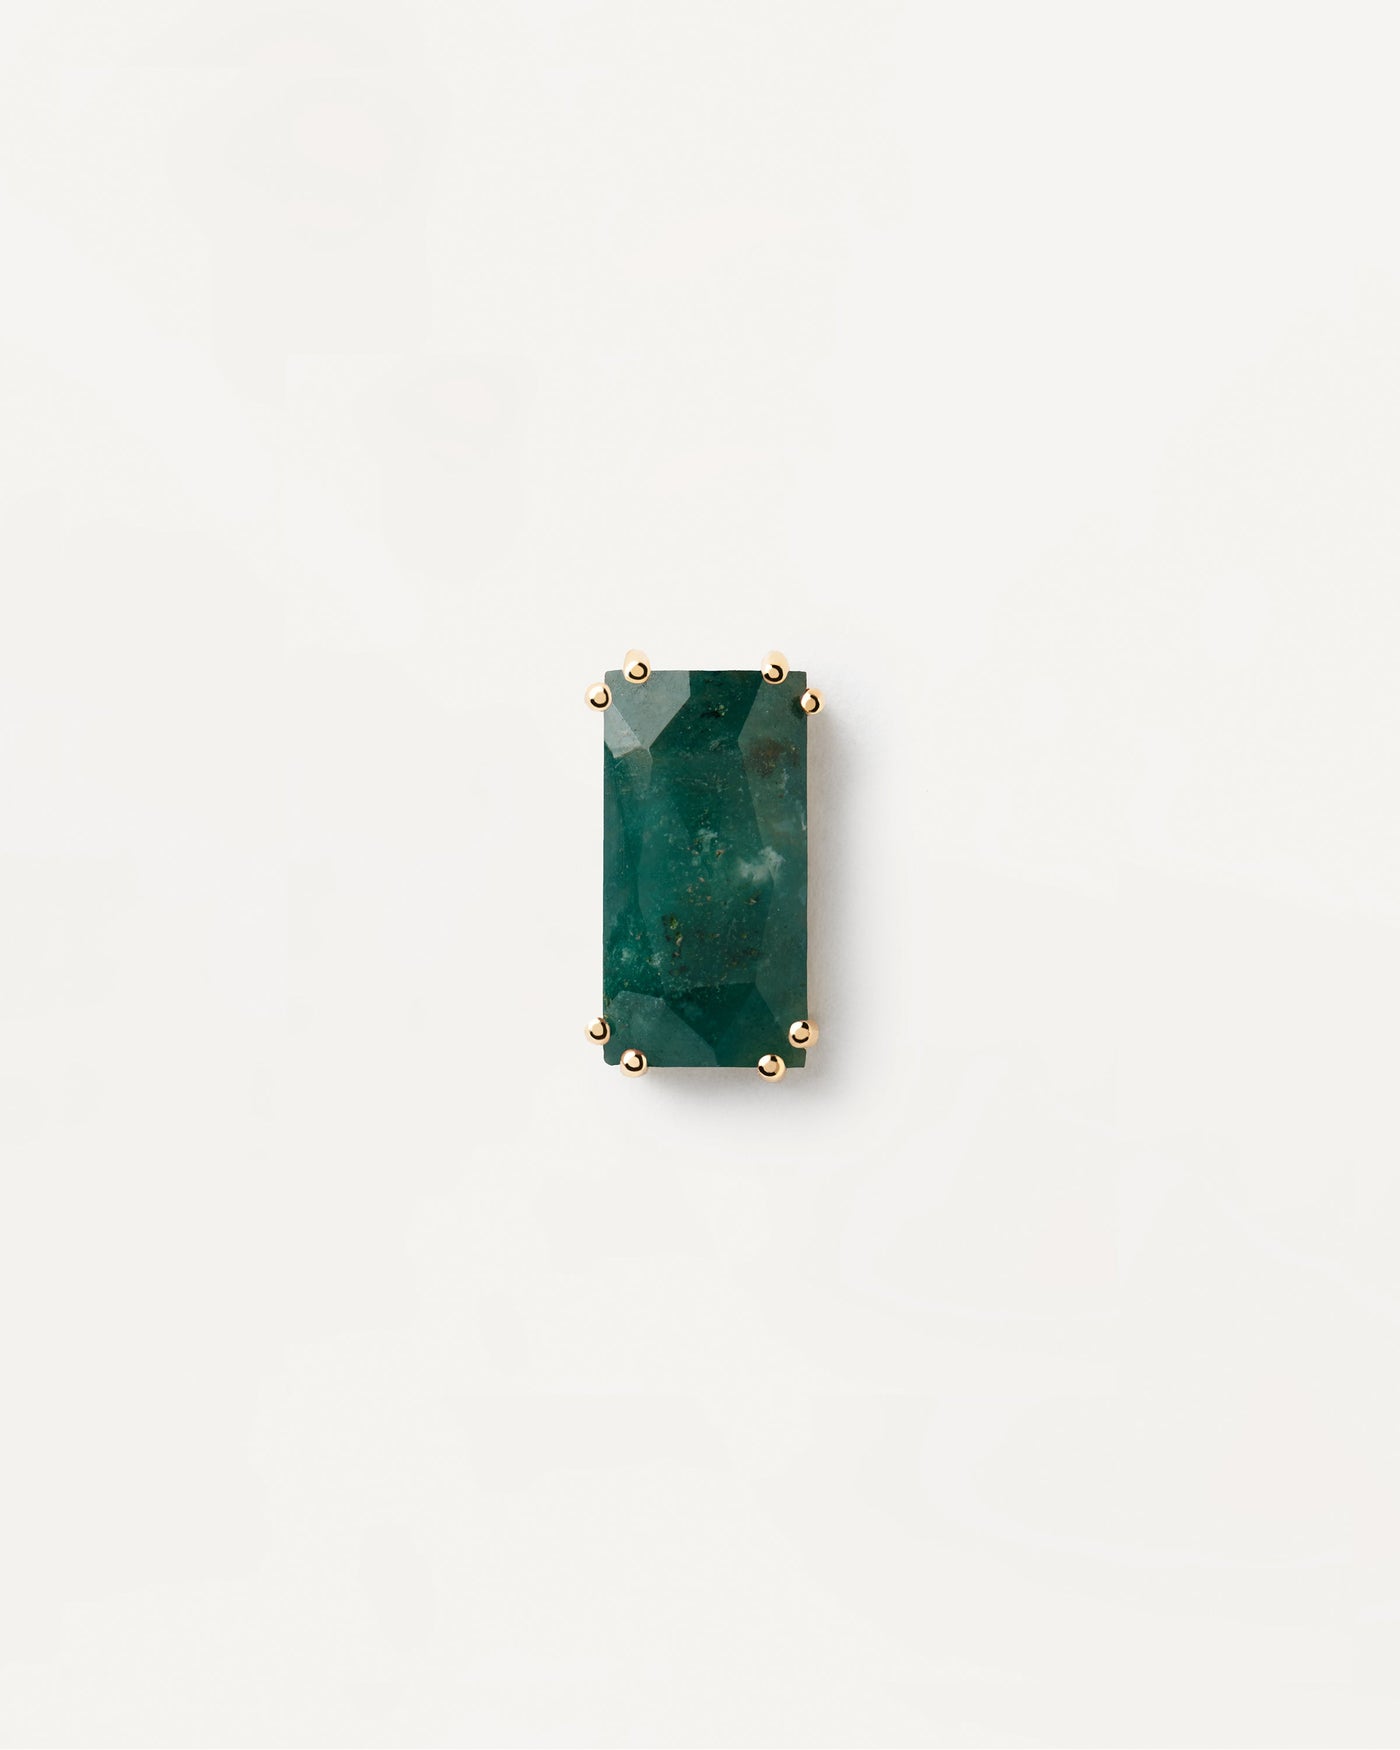 2023 Selection | Maiko Moss Agate Single Earring. Gold-plated pin ear piercing with dark green gemstone in rectangular shape. Get the latest arrival from PDPAOLA. Place your order safely and get this Best Seller. Free Shipping.